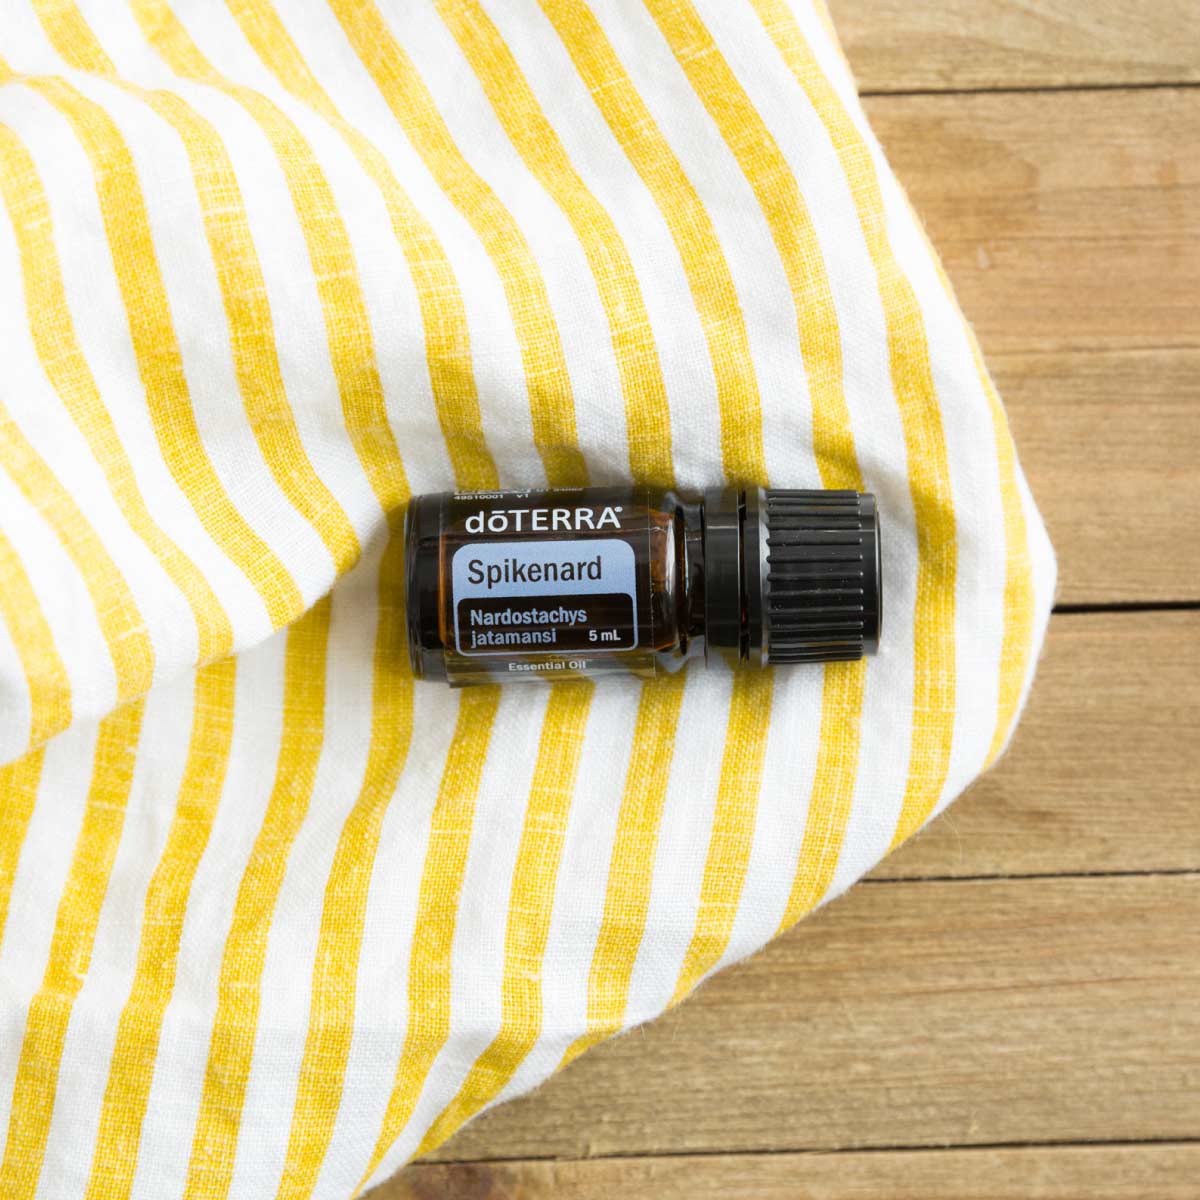 Bottle of Spikenard essential oil resting on a striped yellow dish cloth. What does Spikenard oil smell like? Spikenard essential oil smells woody, spicy, and musty, and is known to be a grounding essential oil.